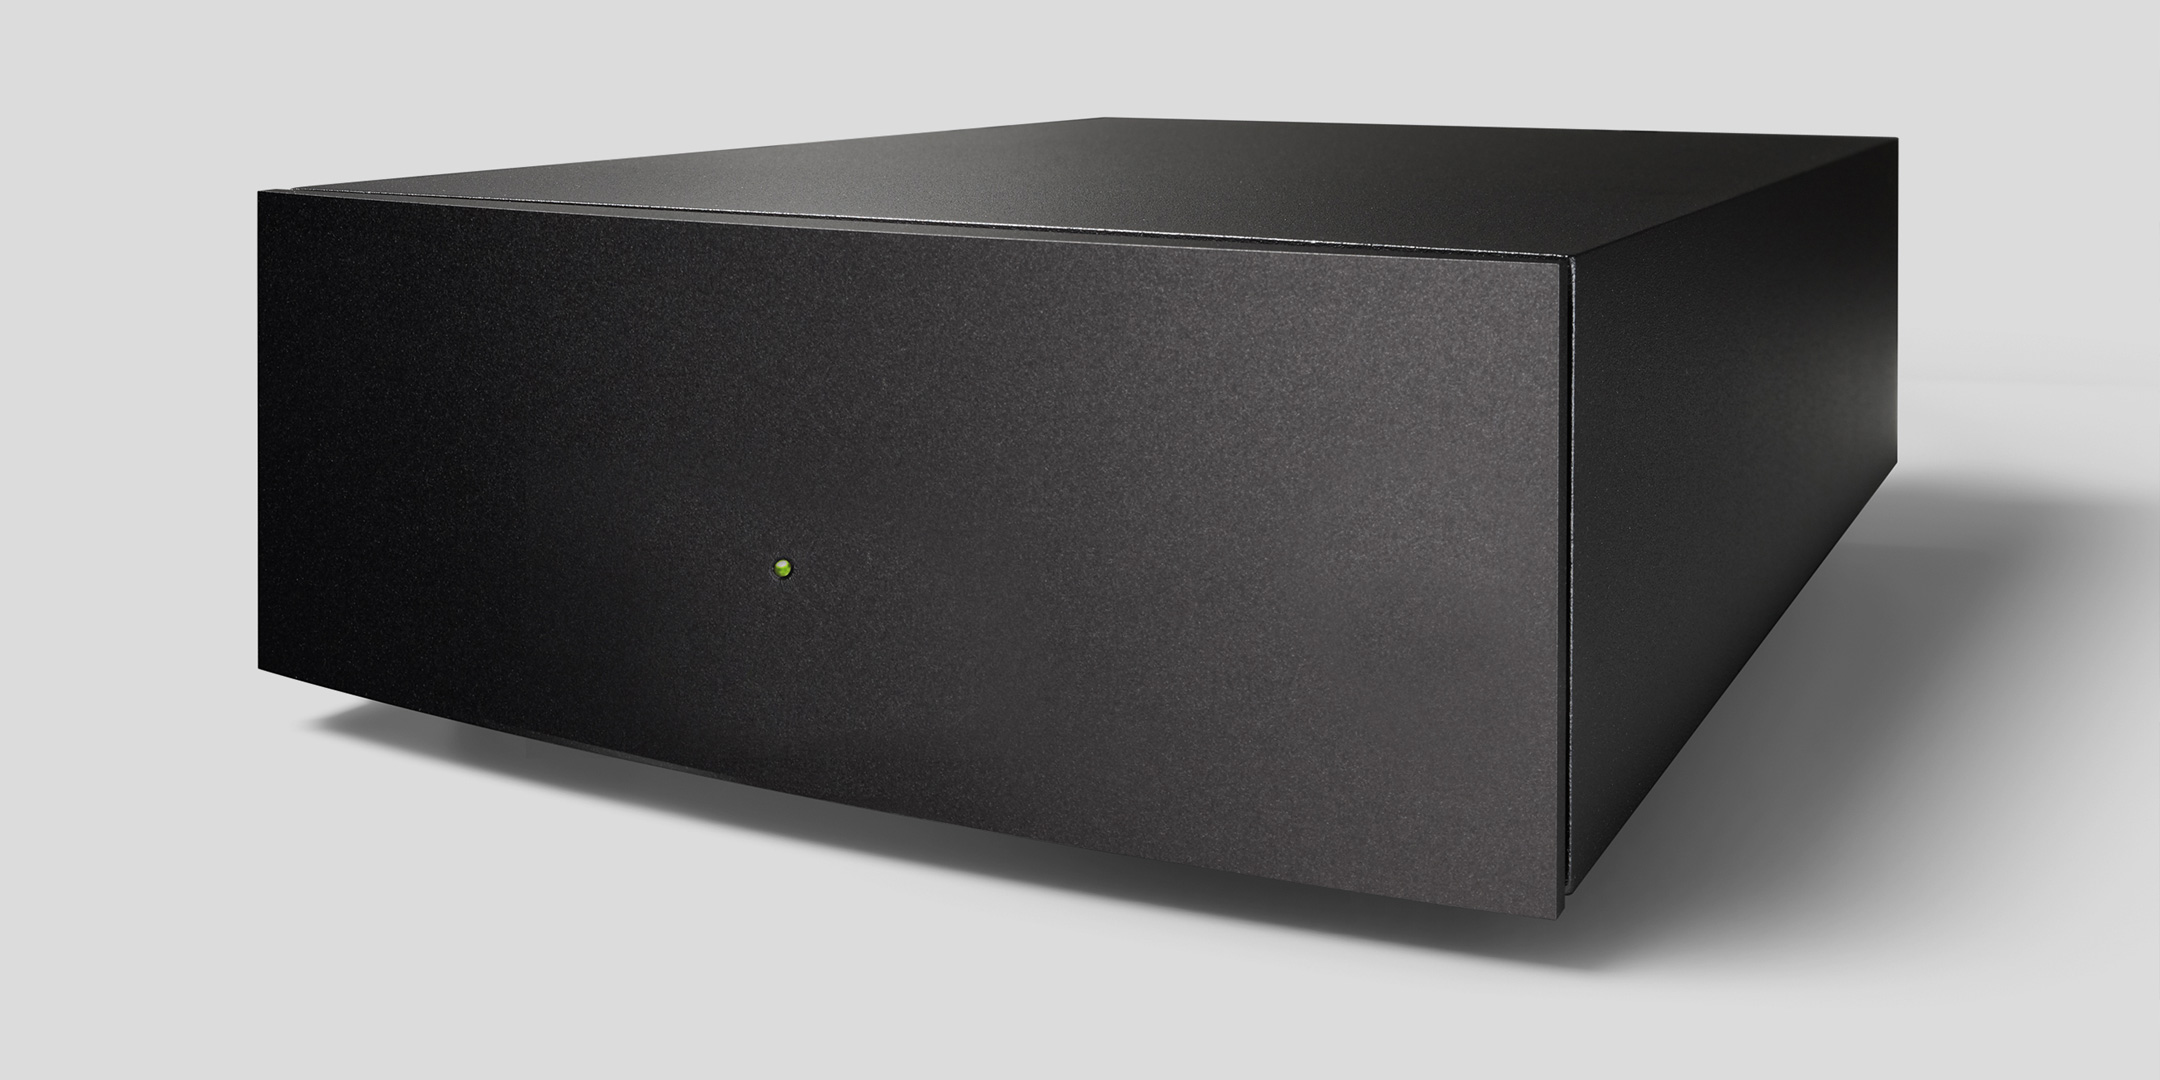 Pic showing a Naim Stageline Phono Stage